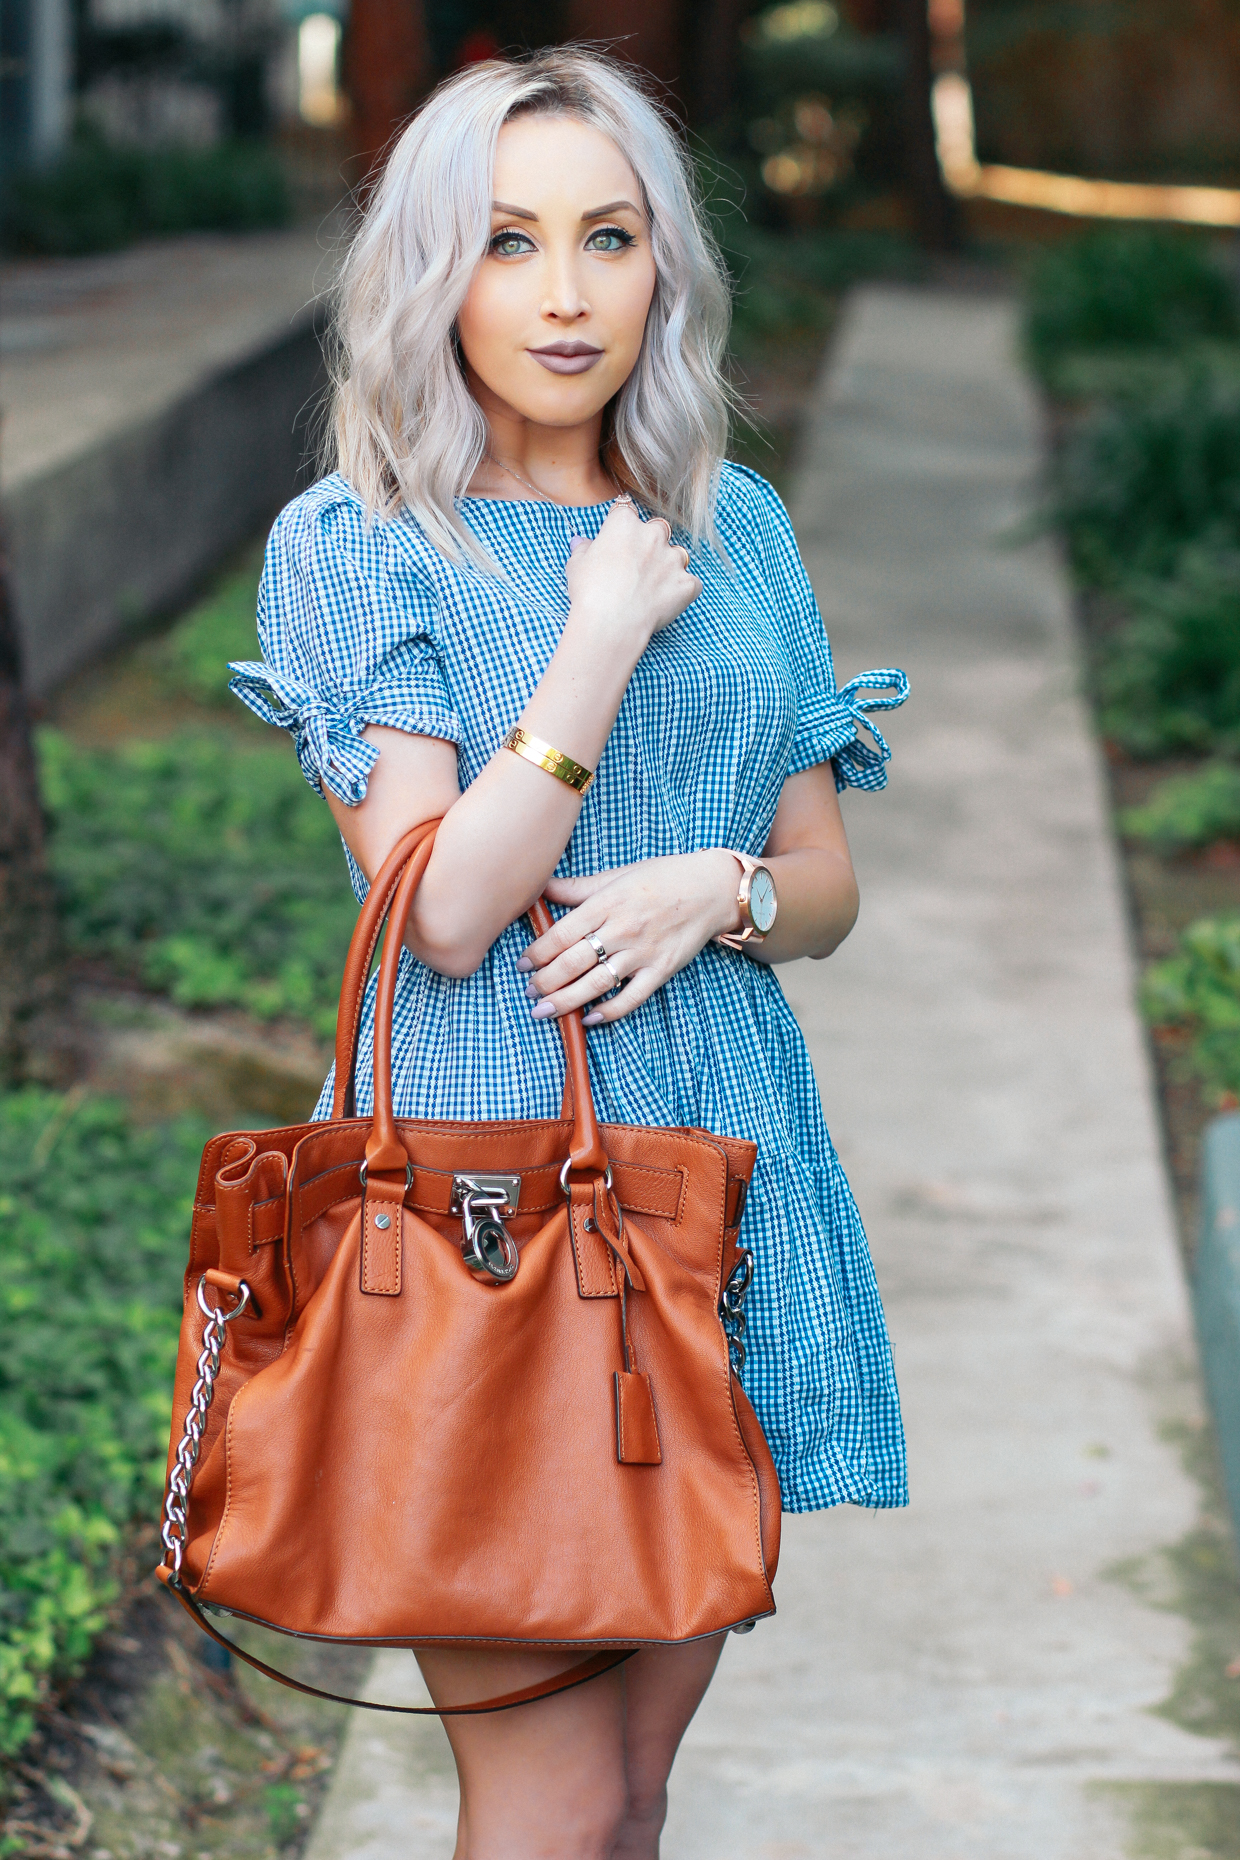 Blondie in the City | Plaid Dress, Camel Michael Kors Bag, Pale Pink Louboutin's